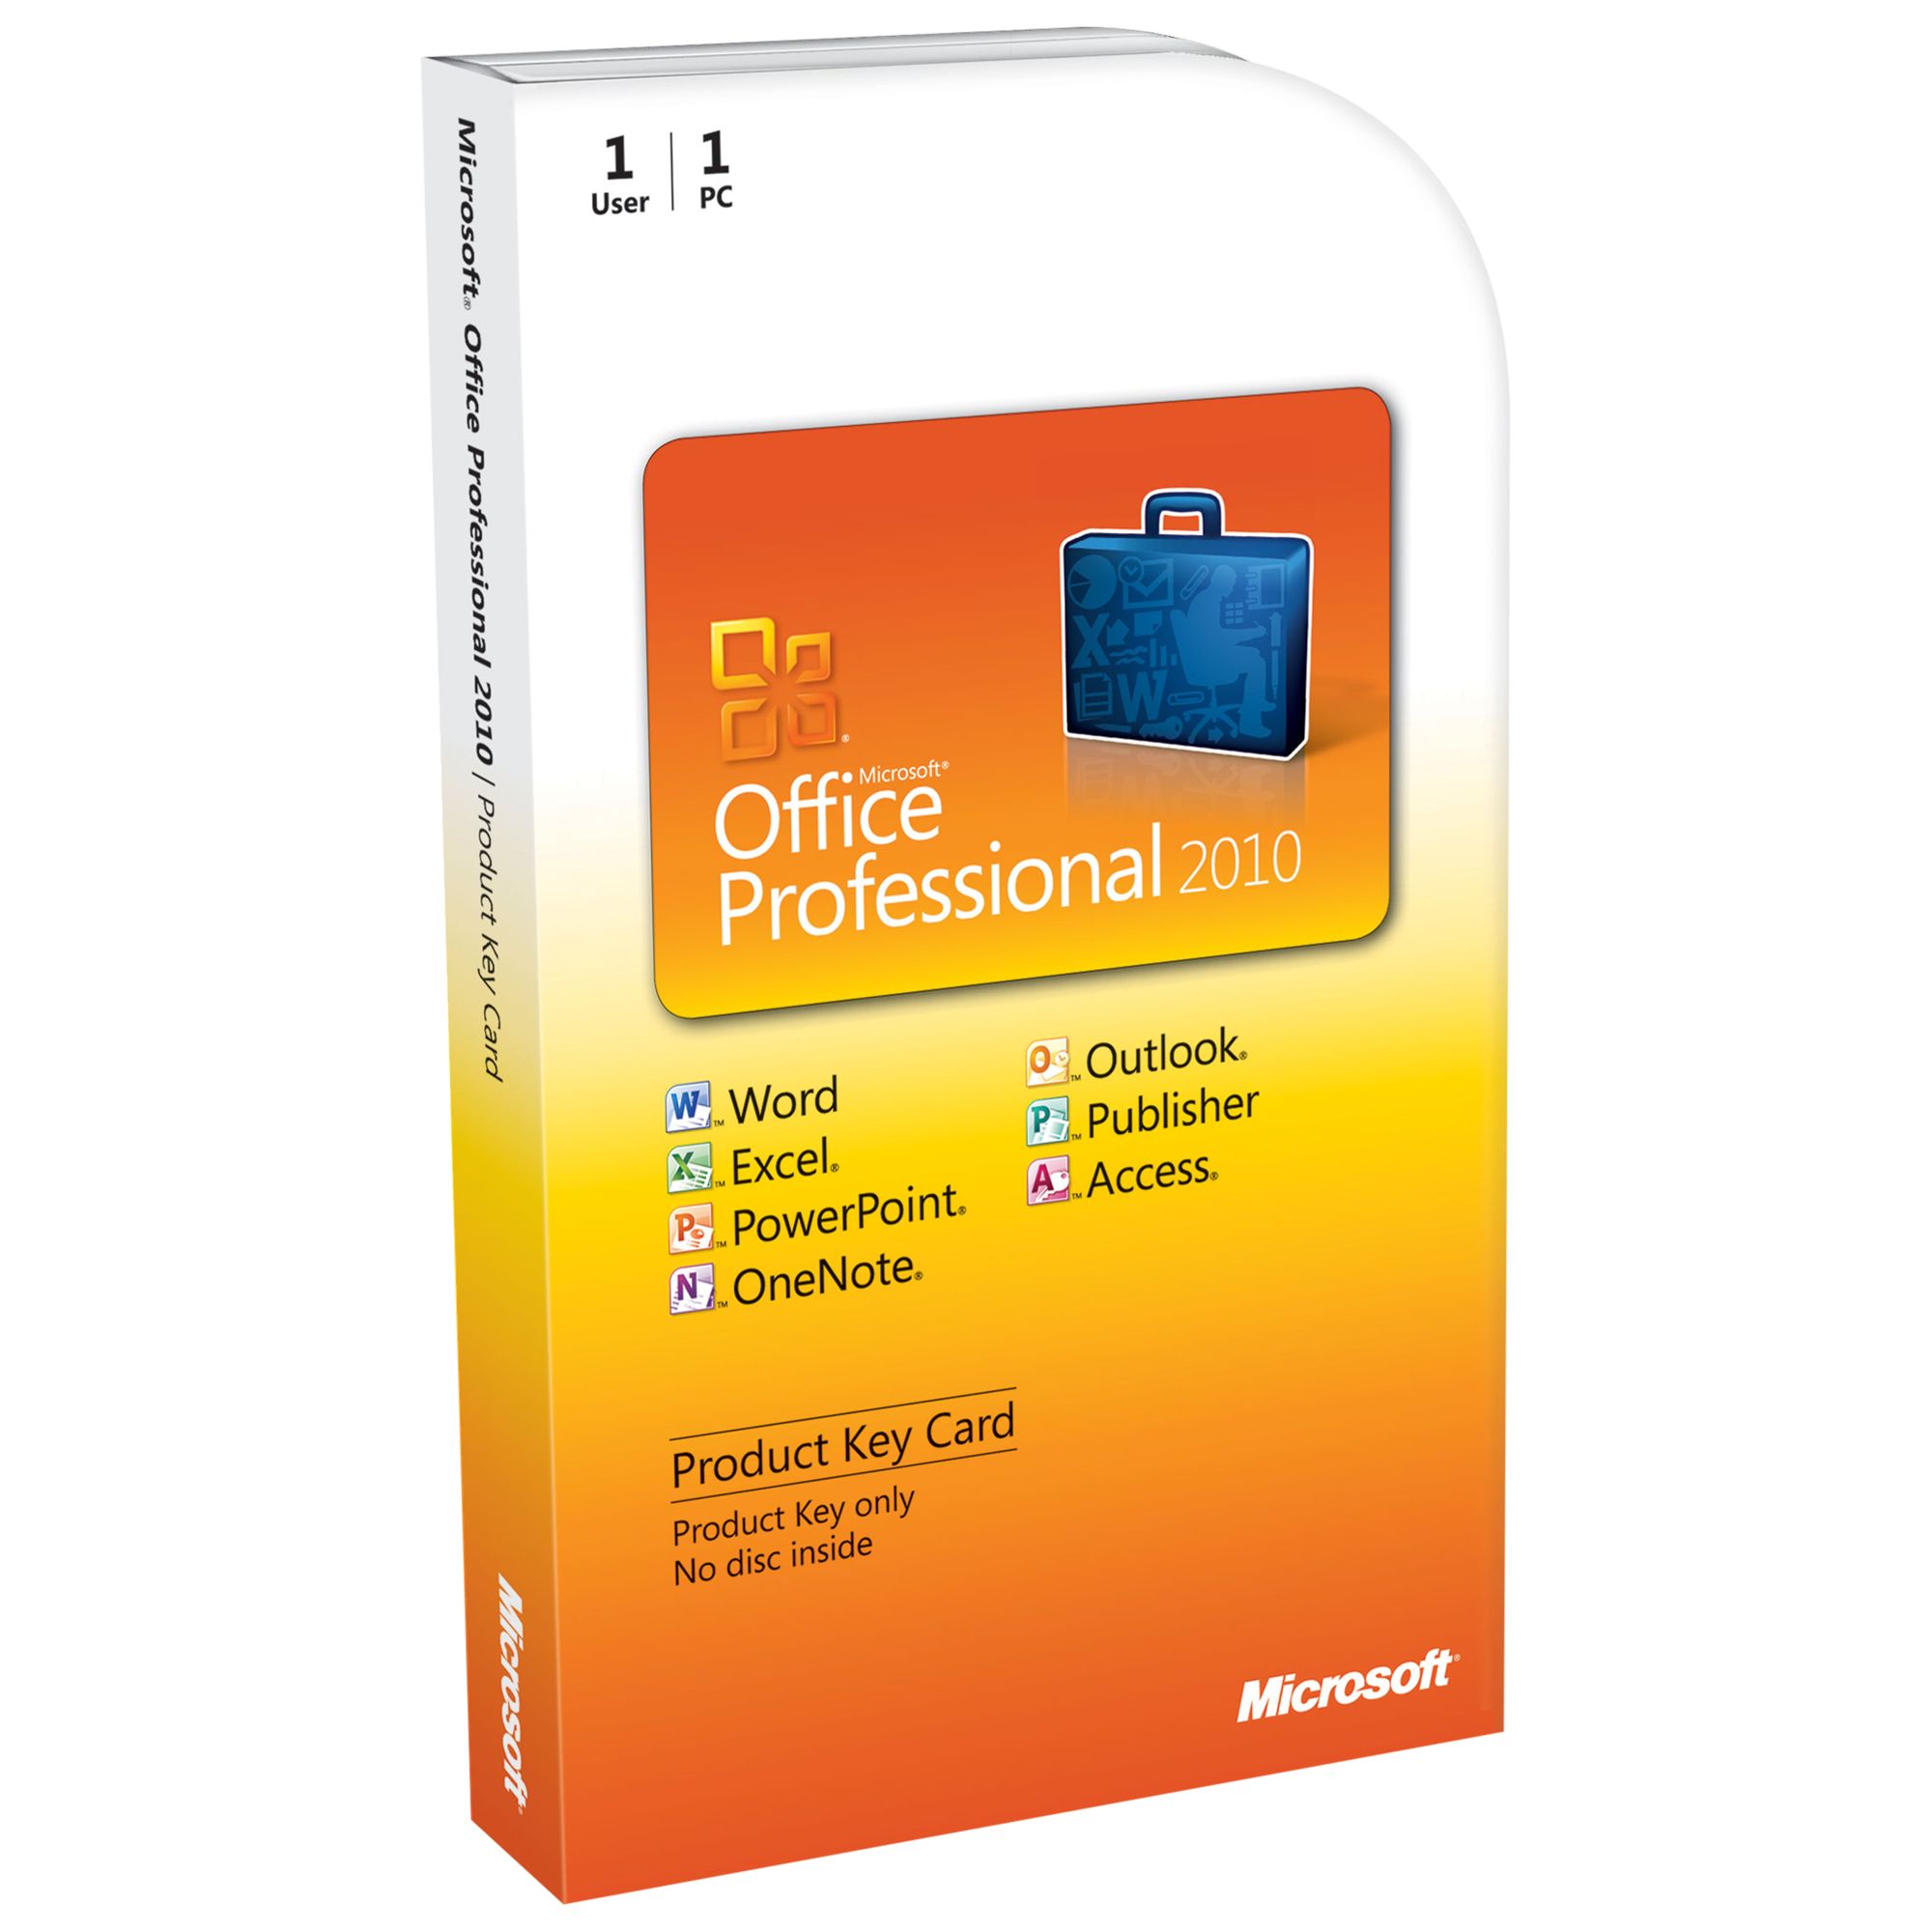 Microsoft Office 2010 Professional Product Key Card, 1 User at John Lewis